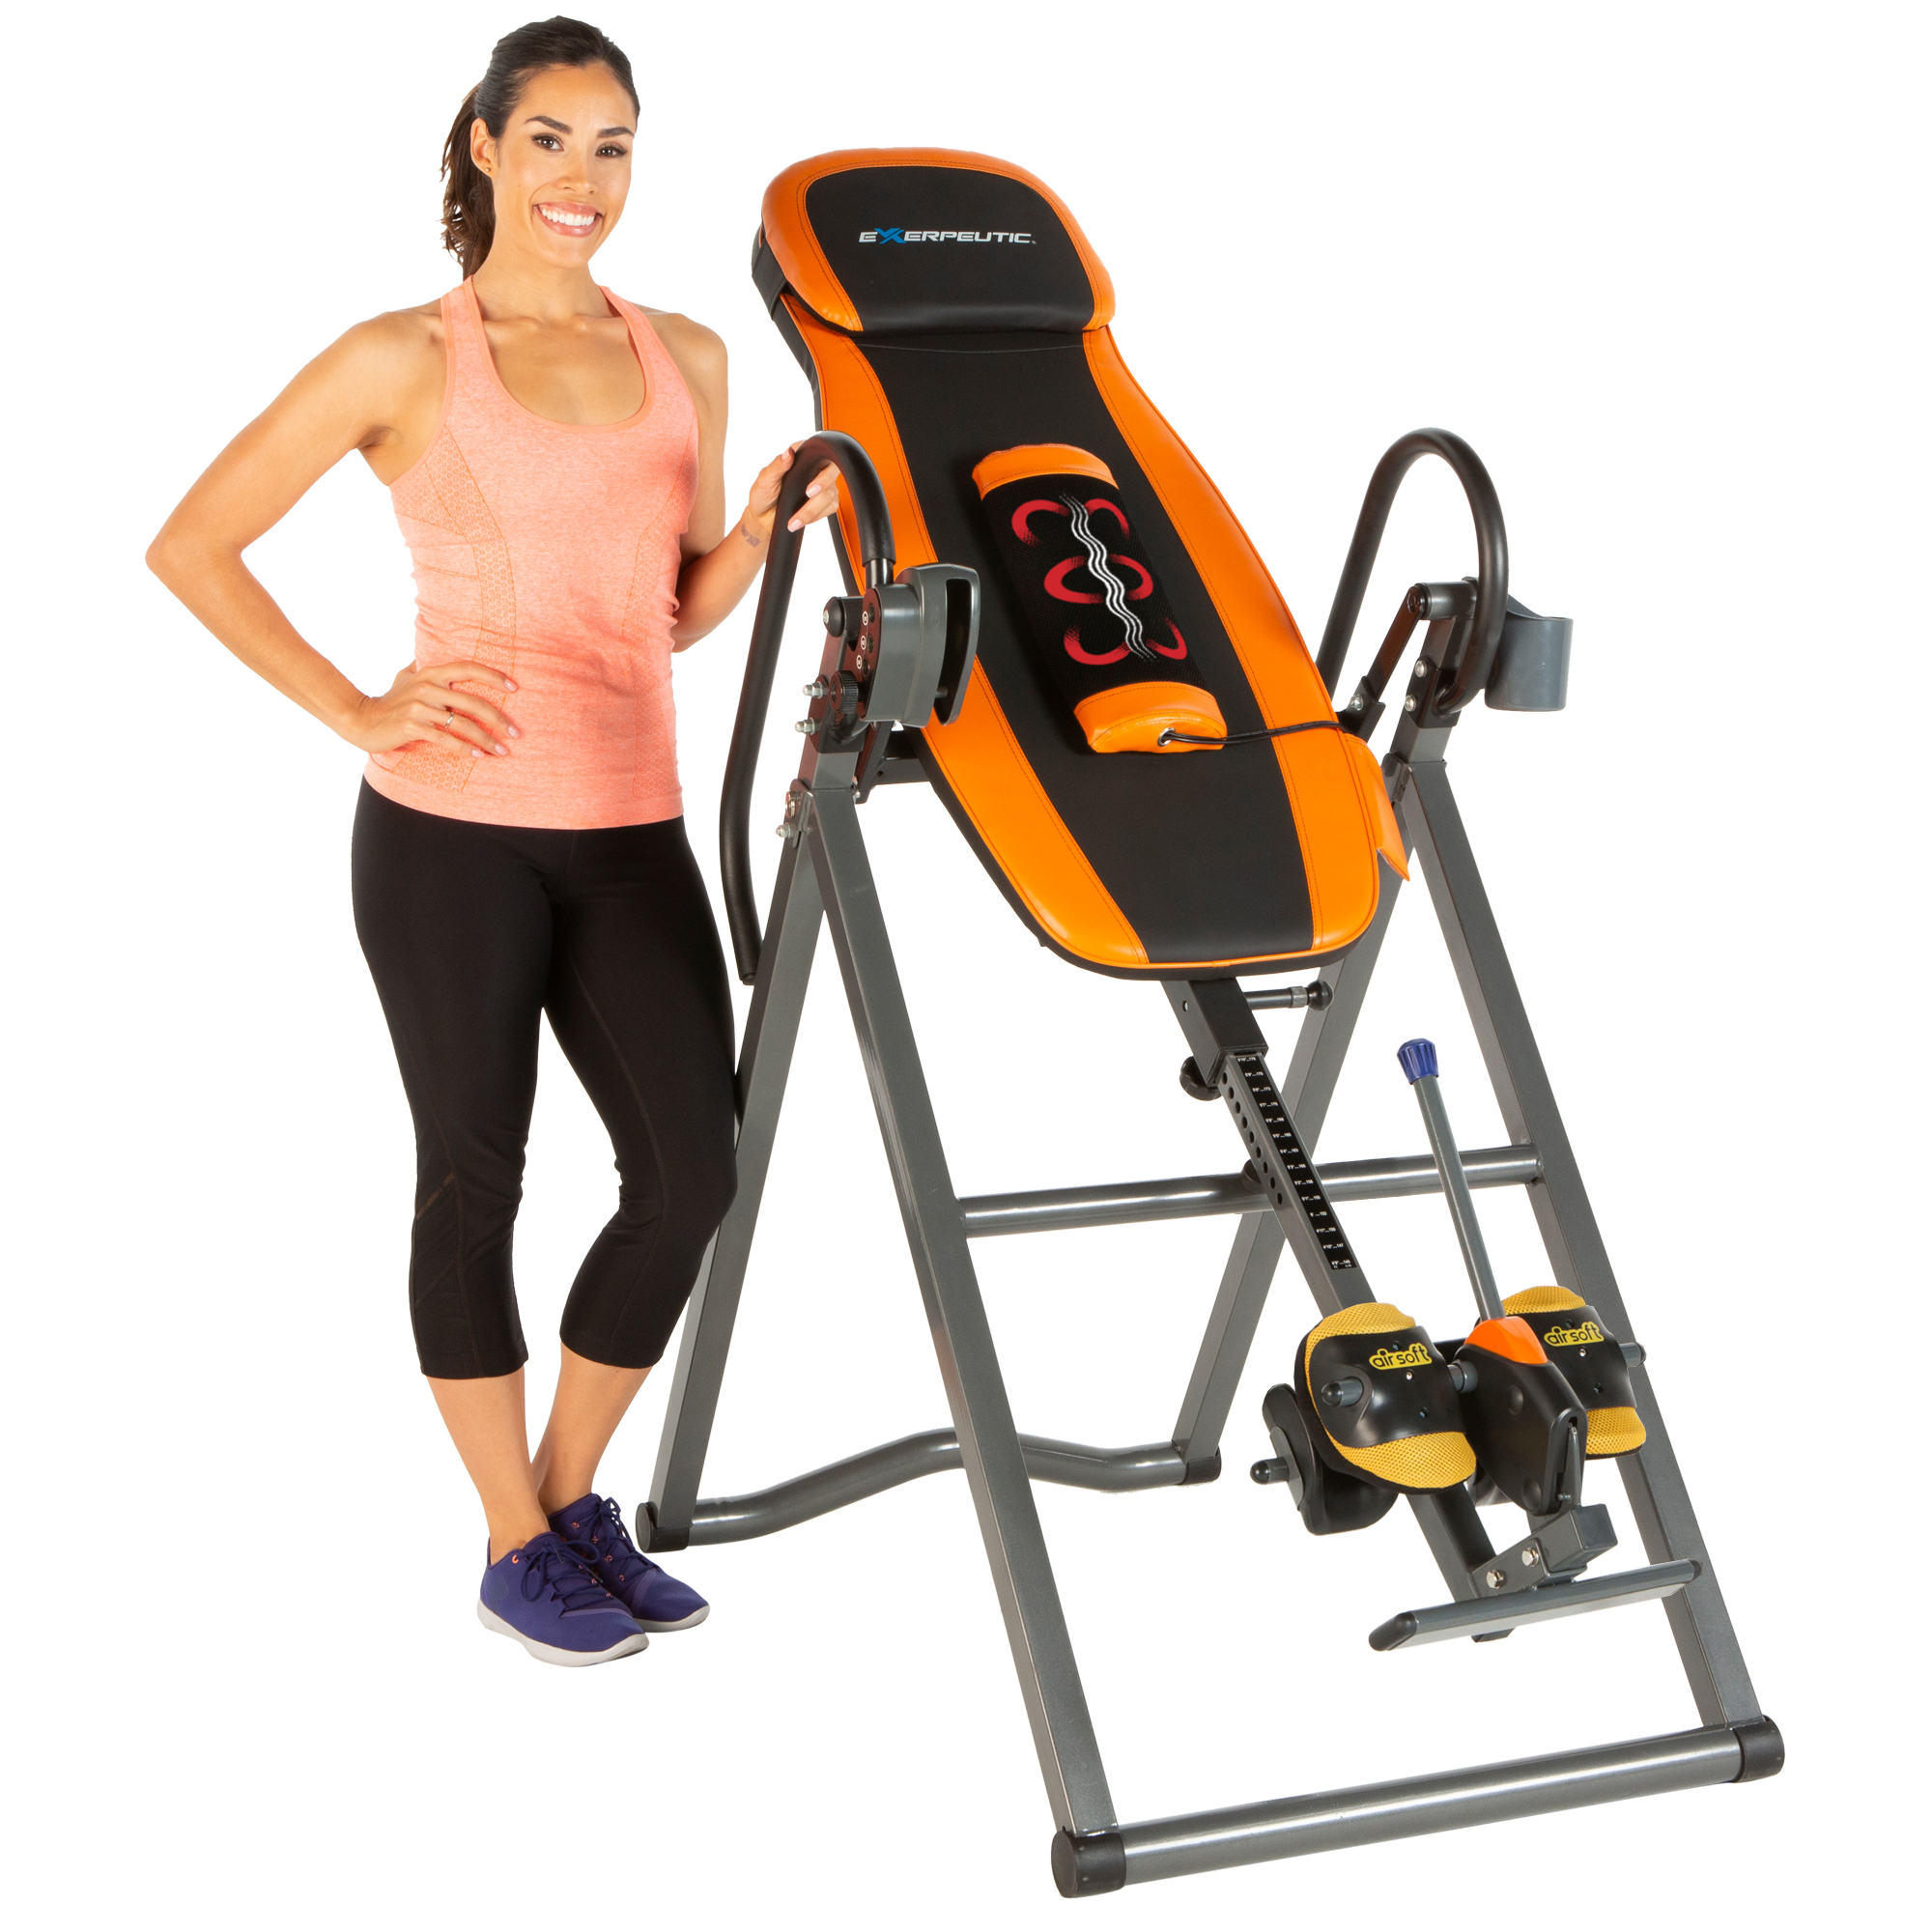 EXERPEUTIC 375SL UL Certified Heat and Massage Therapy Inversion Table with AIRSOFT No Pinch Ankle Holders and 'Surelock' Locking System - image 5 of 23